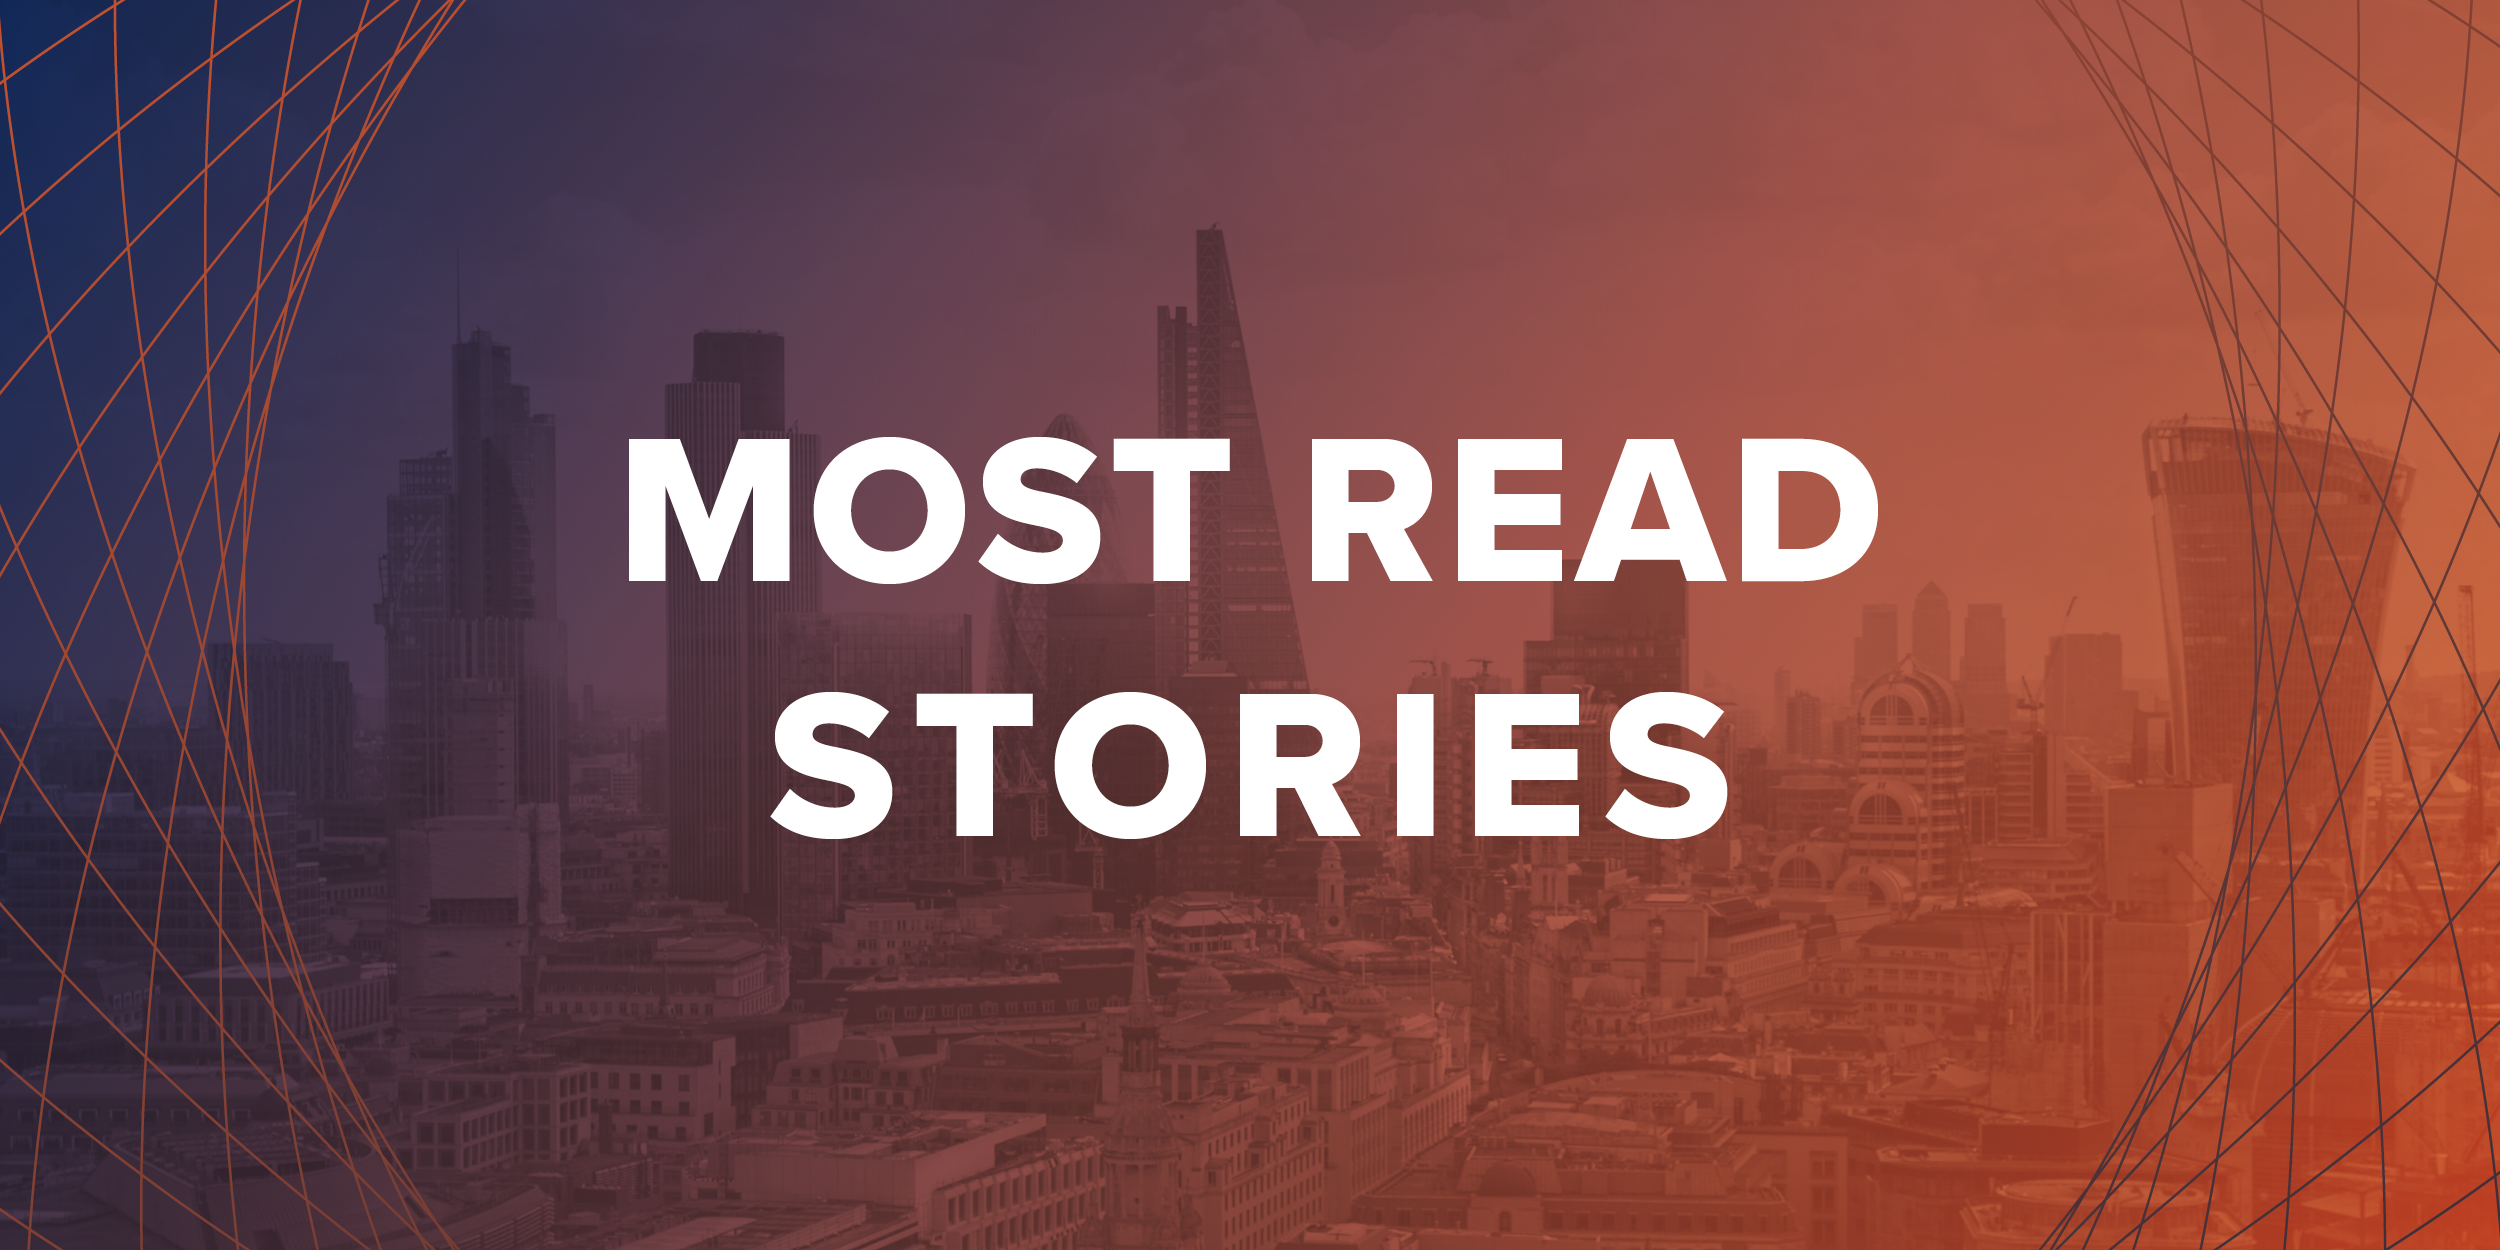 Most read stories